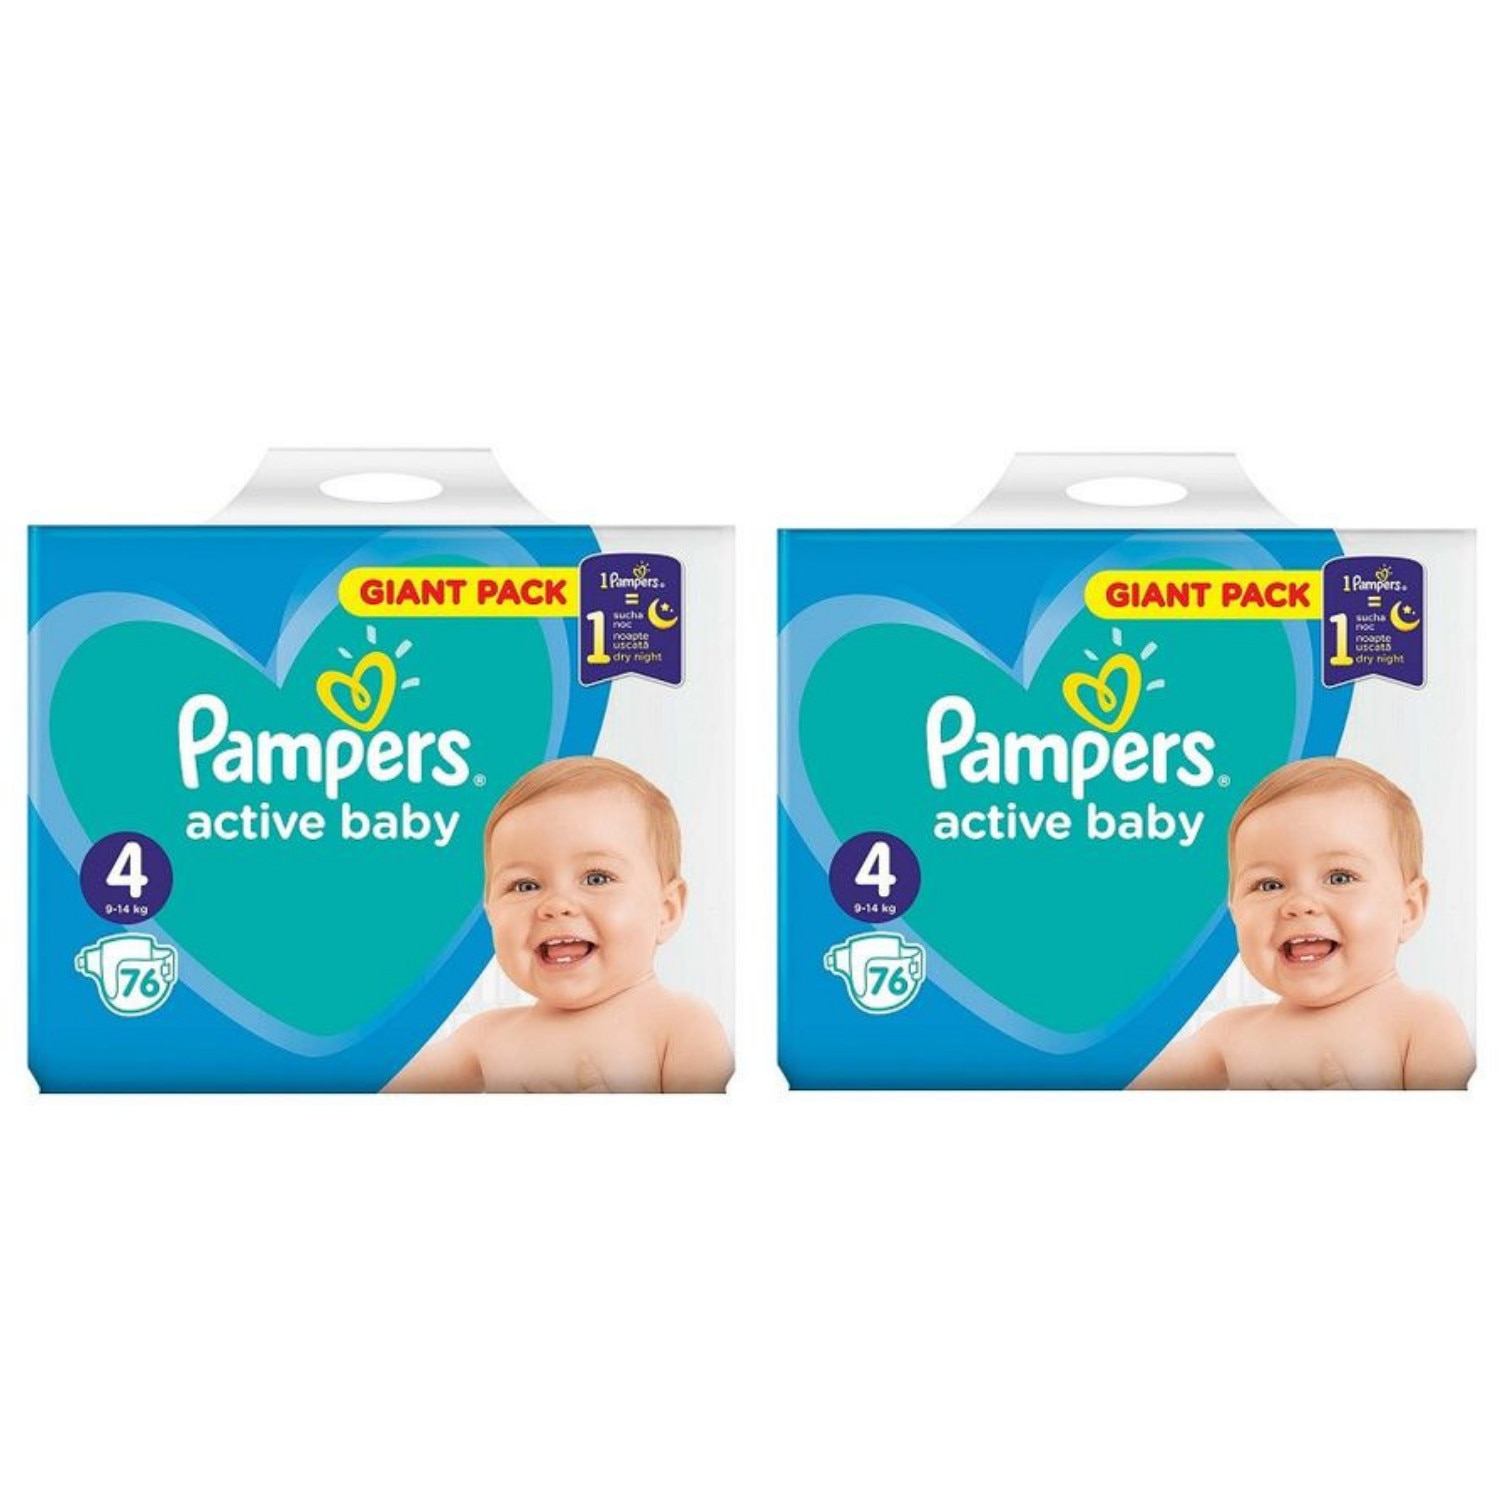 Lock Pile of position Scutece Pampers Active Baby Nr. 4, 9-14 Kg 2 x 76 Buc. 152 buc. Gigant Pack  - eMAG.ro